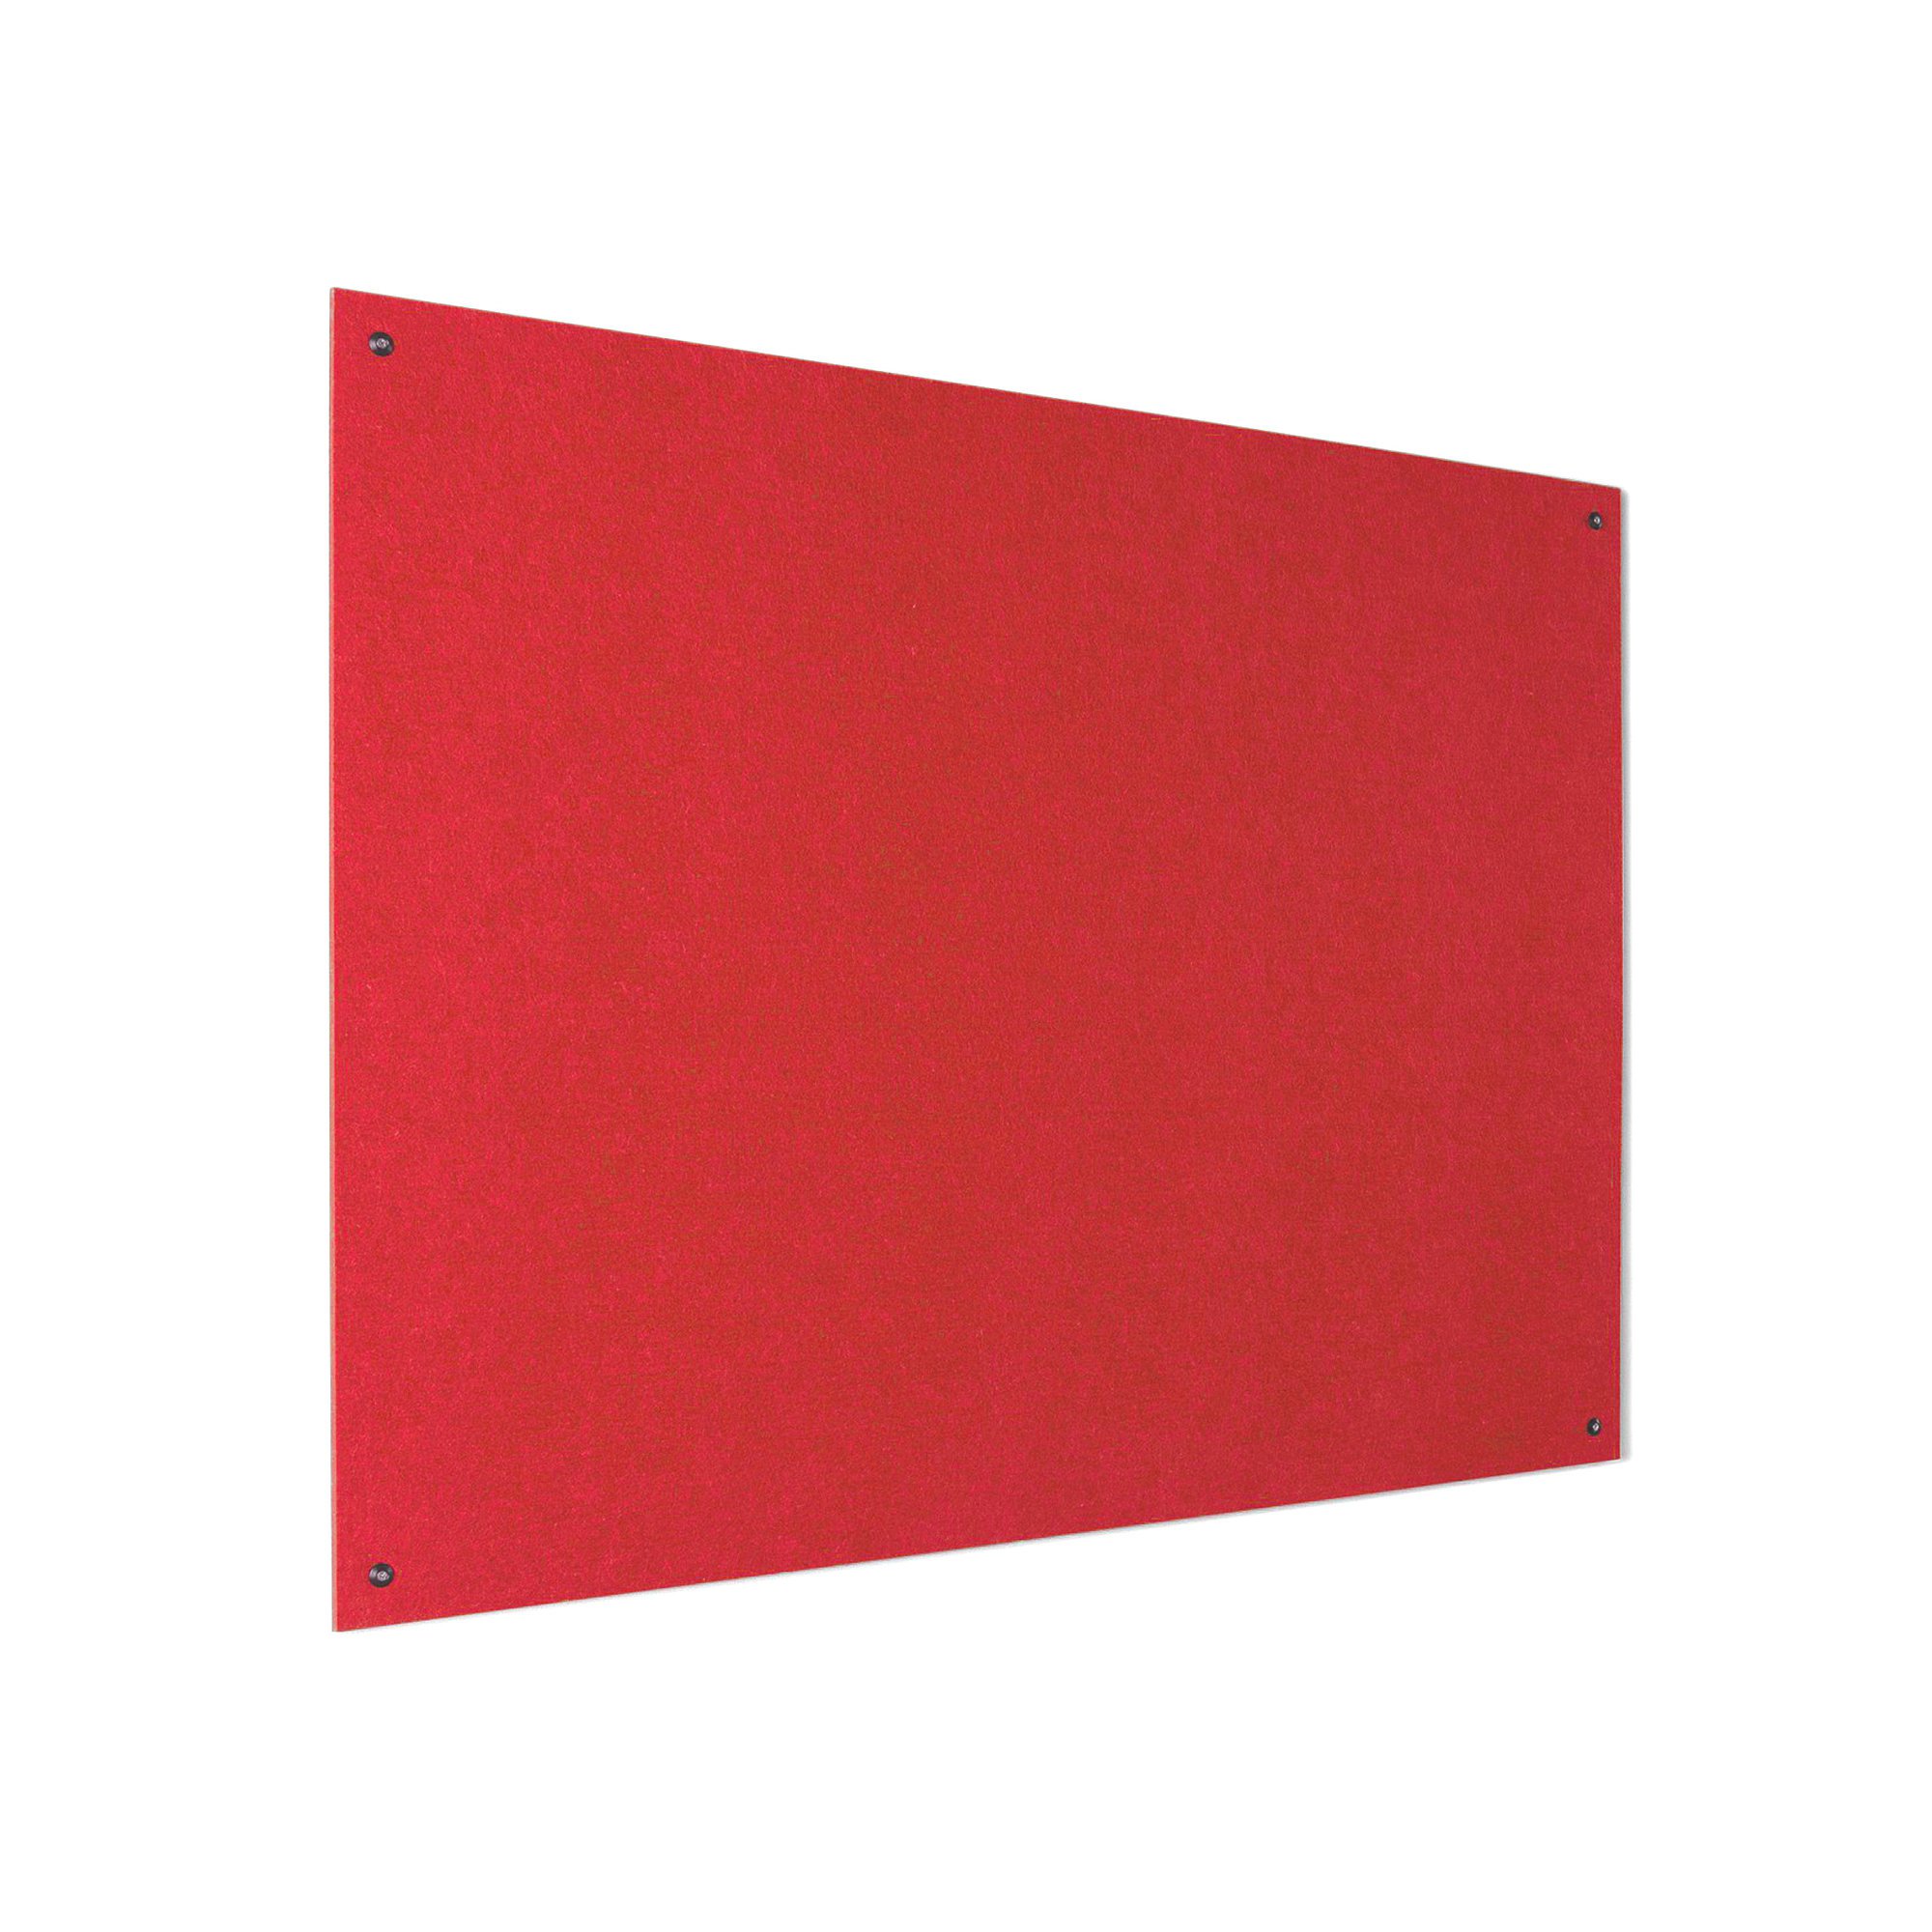 Recycled fire-retardant noticeboard, 1800x1200 mm, red